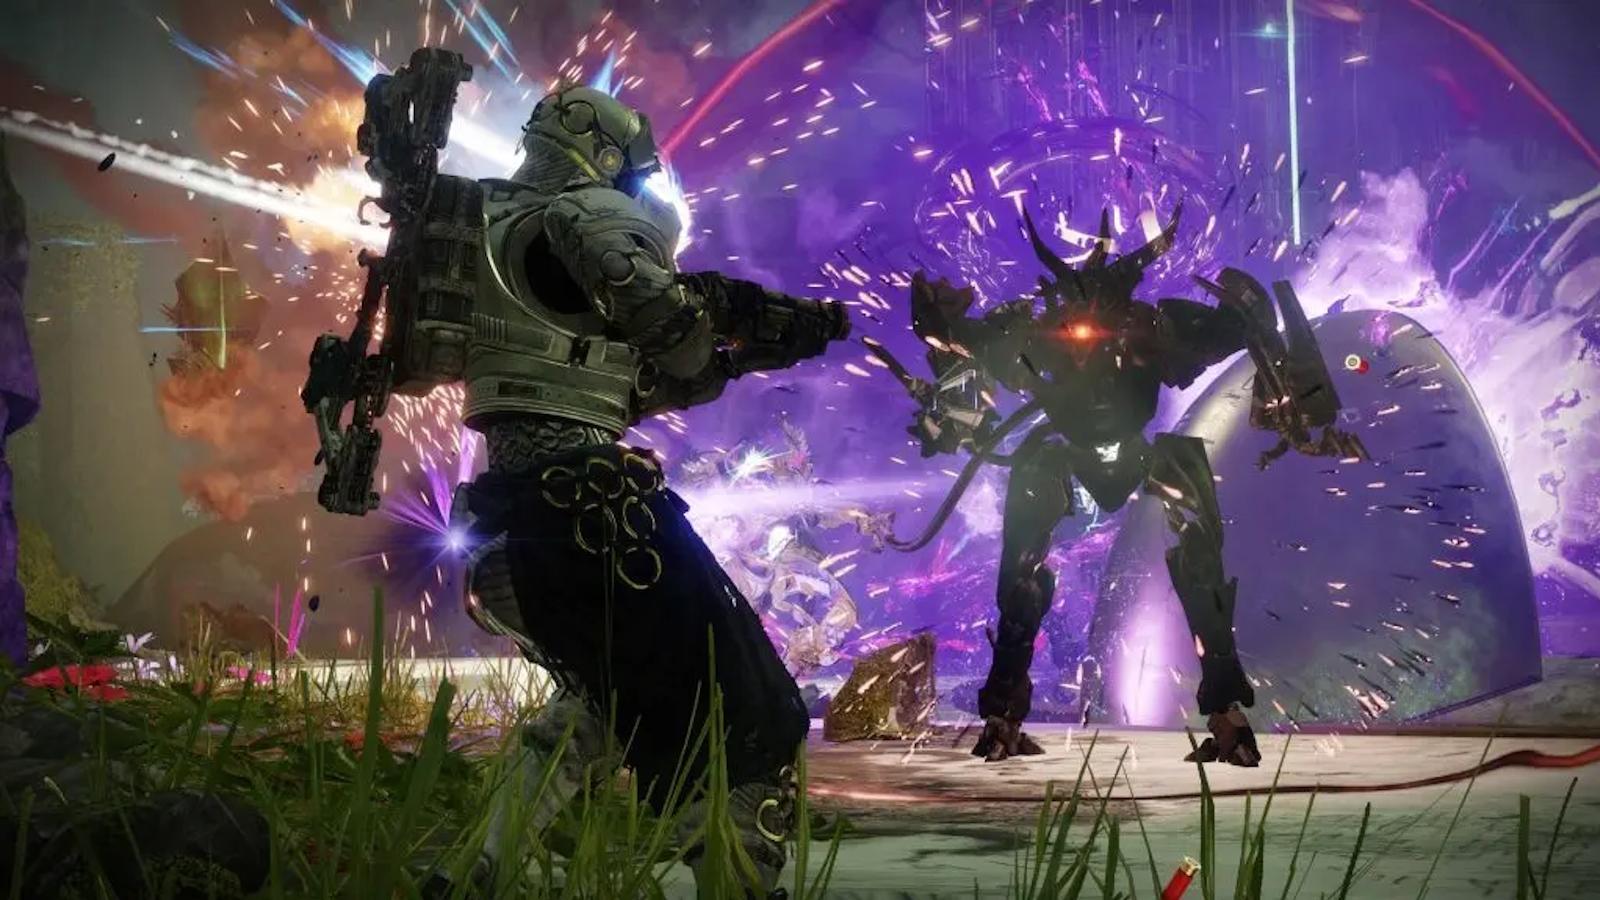 Guardian about to stun an Overload Champion in Destiny 2